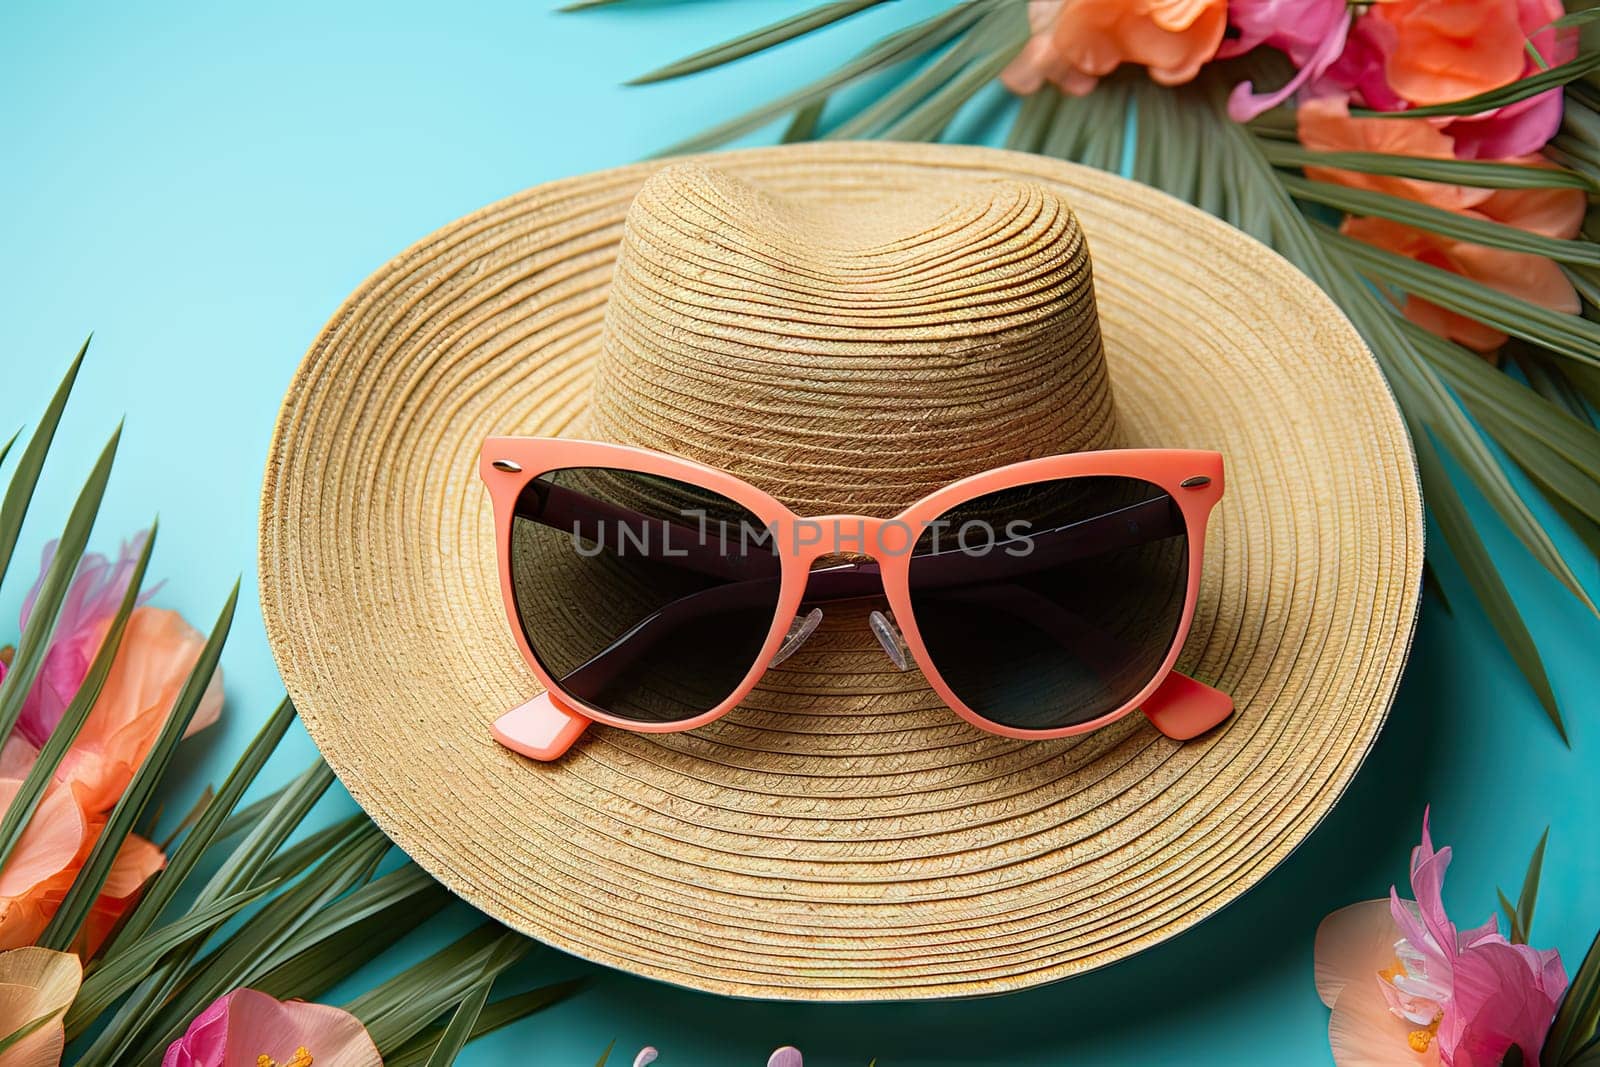 A hat, sunglasses and flowers on a blue background by golibtolibov